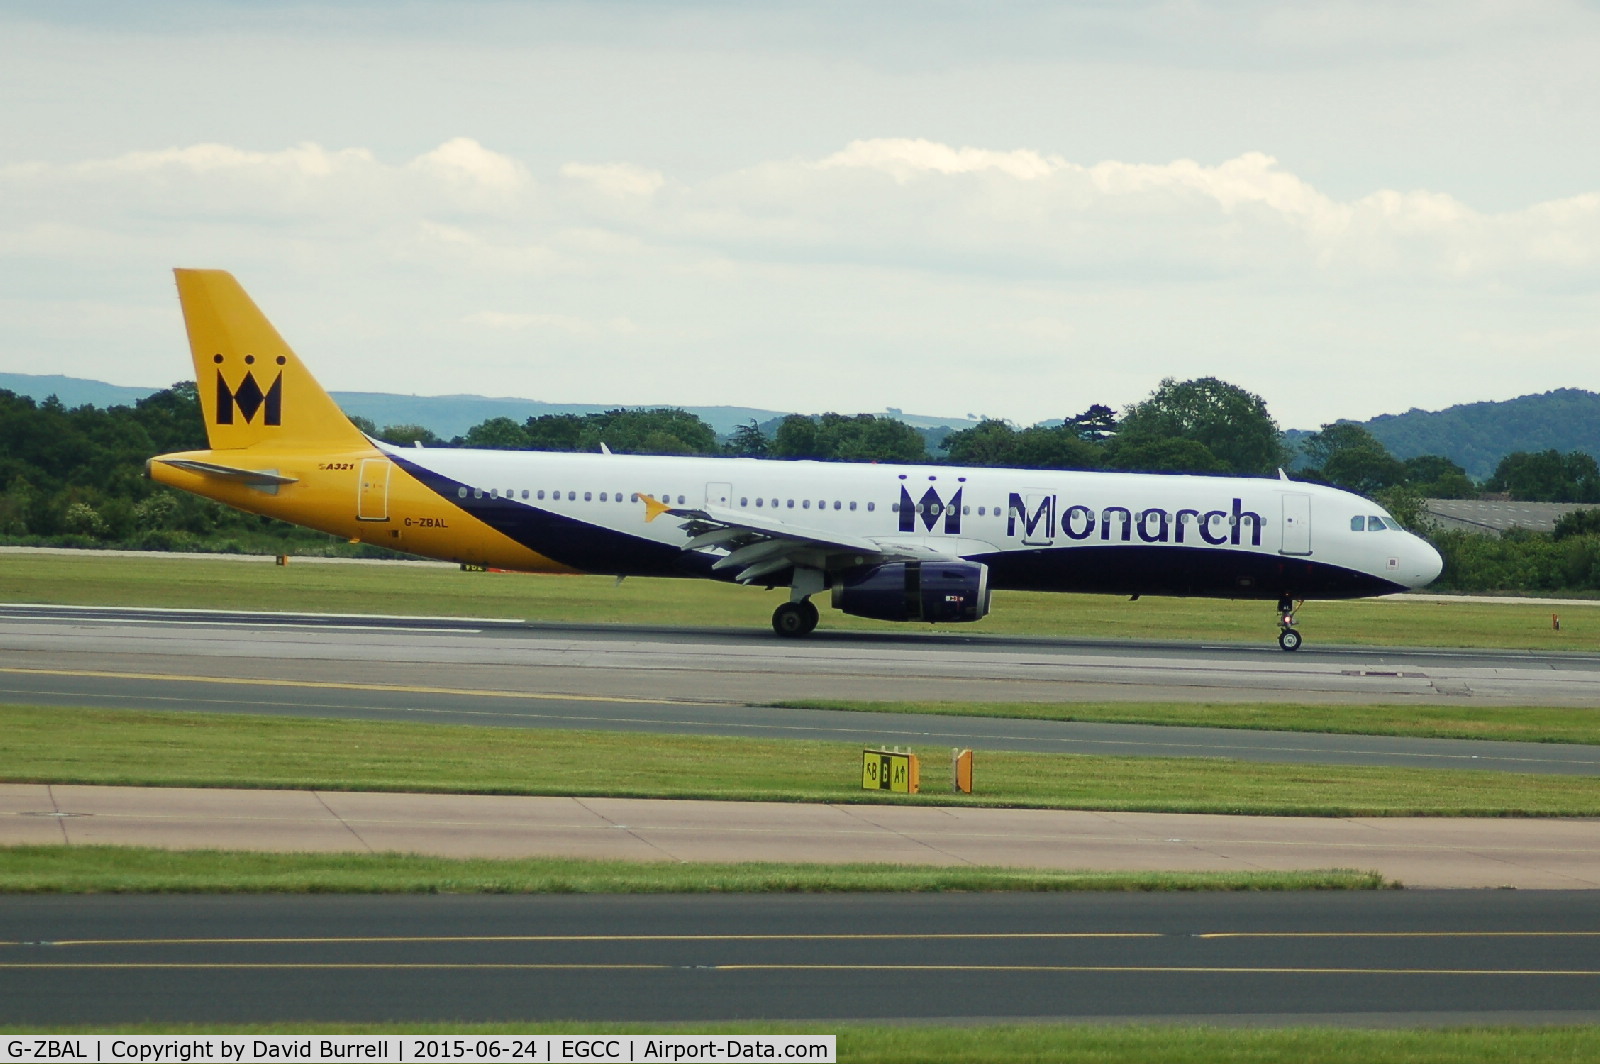 G-ZBAL, 2008 Airbus A321-231 C/N 3522, Monarch Airbus A321-231 landed at Manchester Airport.